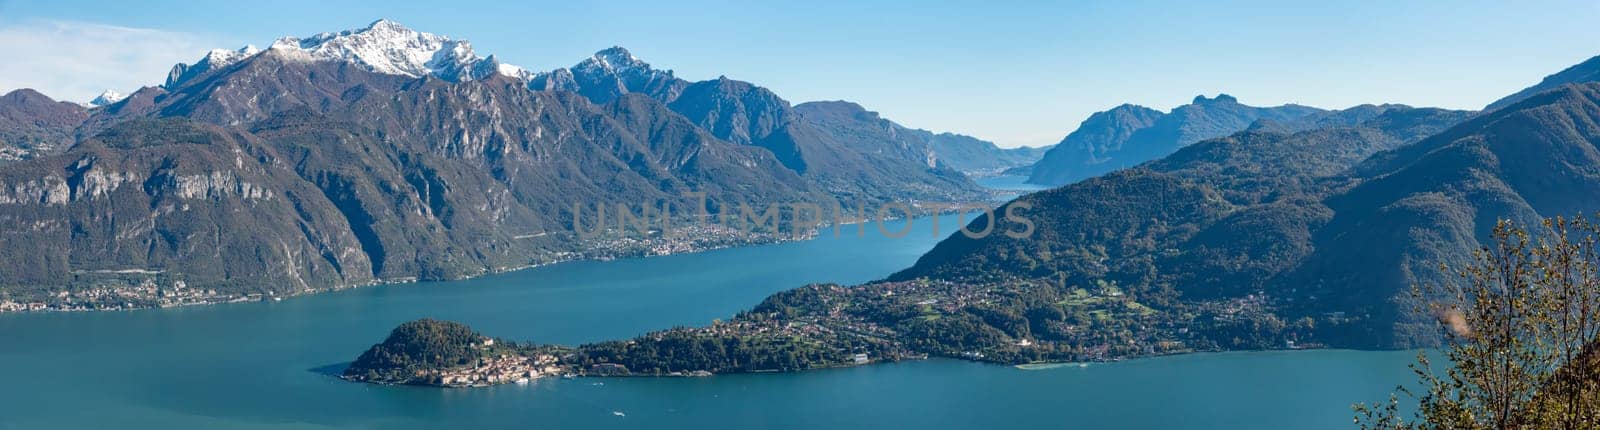 Magnificent view of Bellagio at lake Como seen from Monte Crocione, Italy